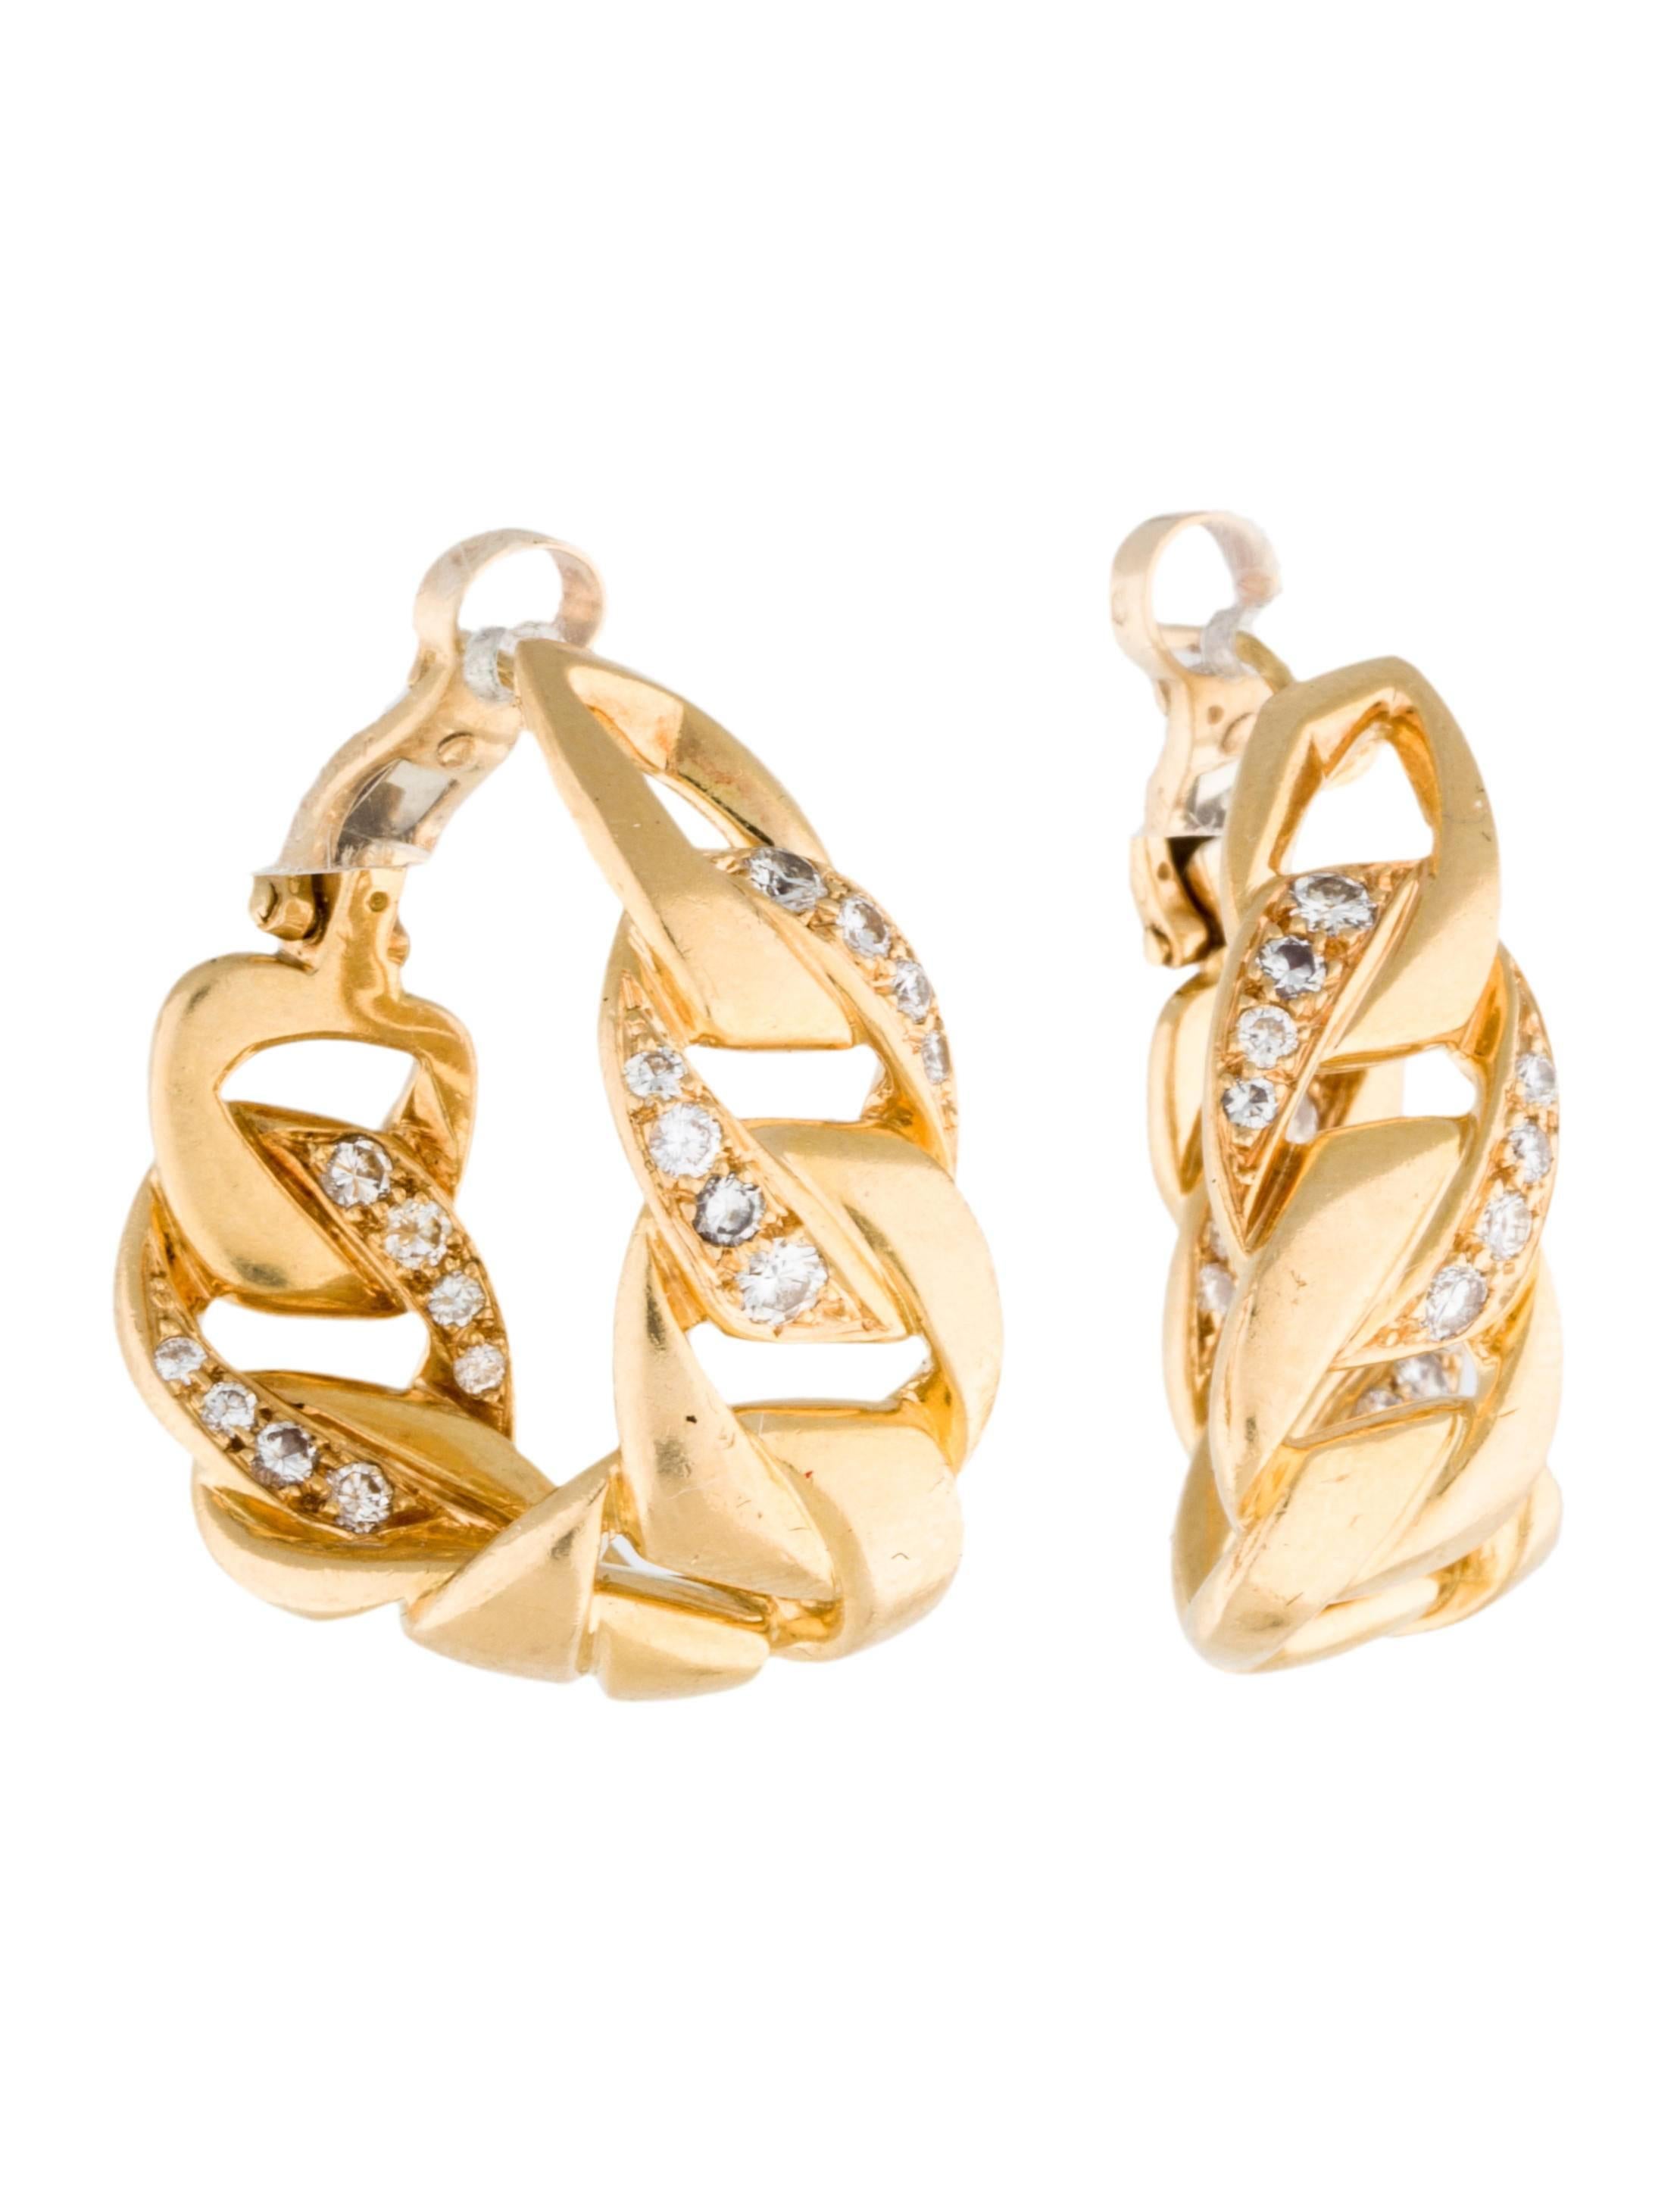 18K yellow gold Cartier huggie earrings with chain-link motif featuring pavé round brilliant diamonds and omega back closures. Includes box.

Metal Type: 18K Yellow Gold
Hallmark: 750
Signature: Cartier
Location: Exterior Surface
Metal